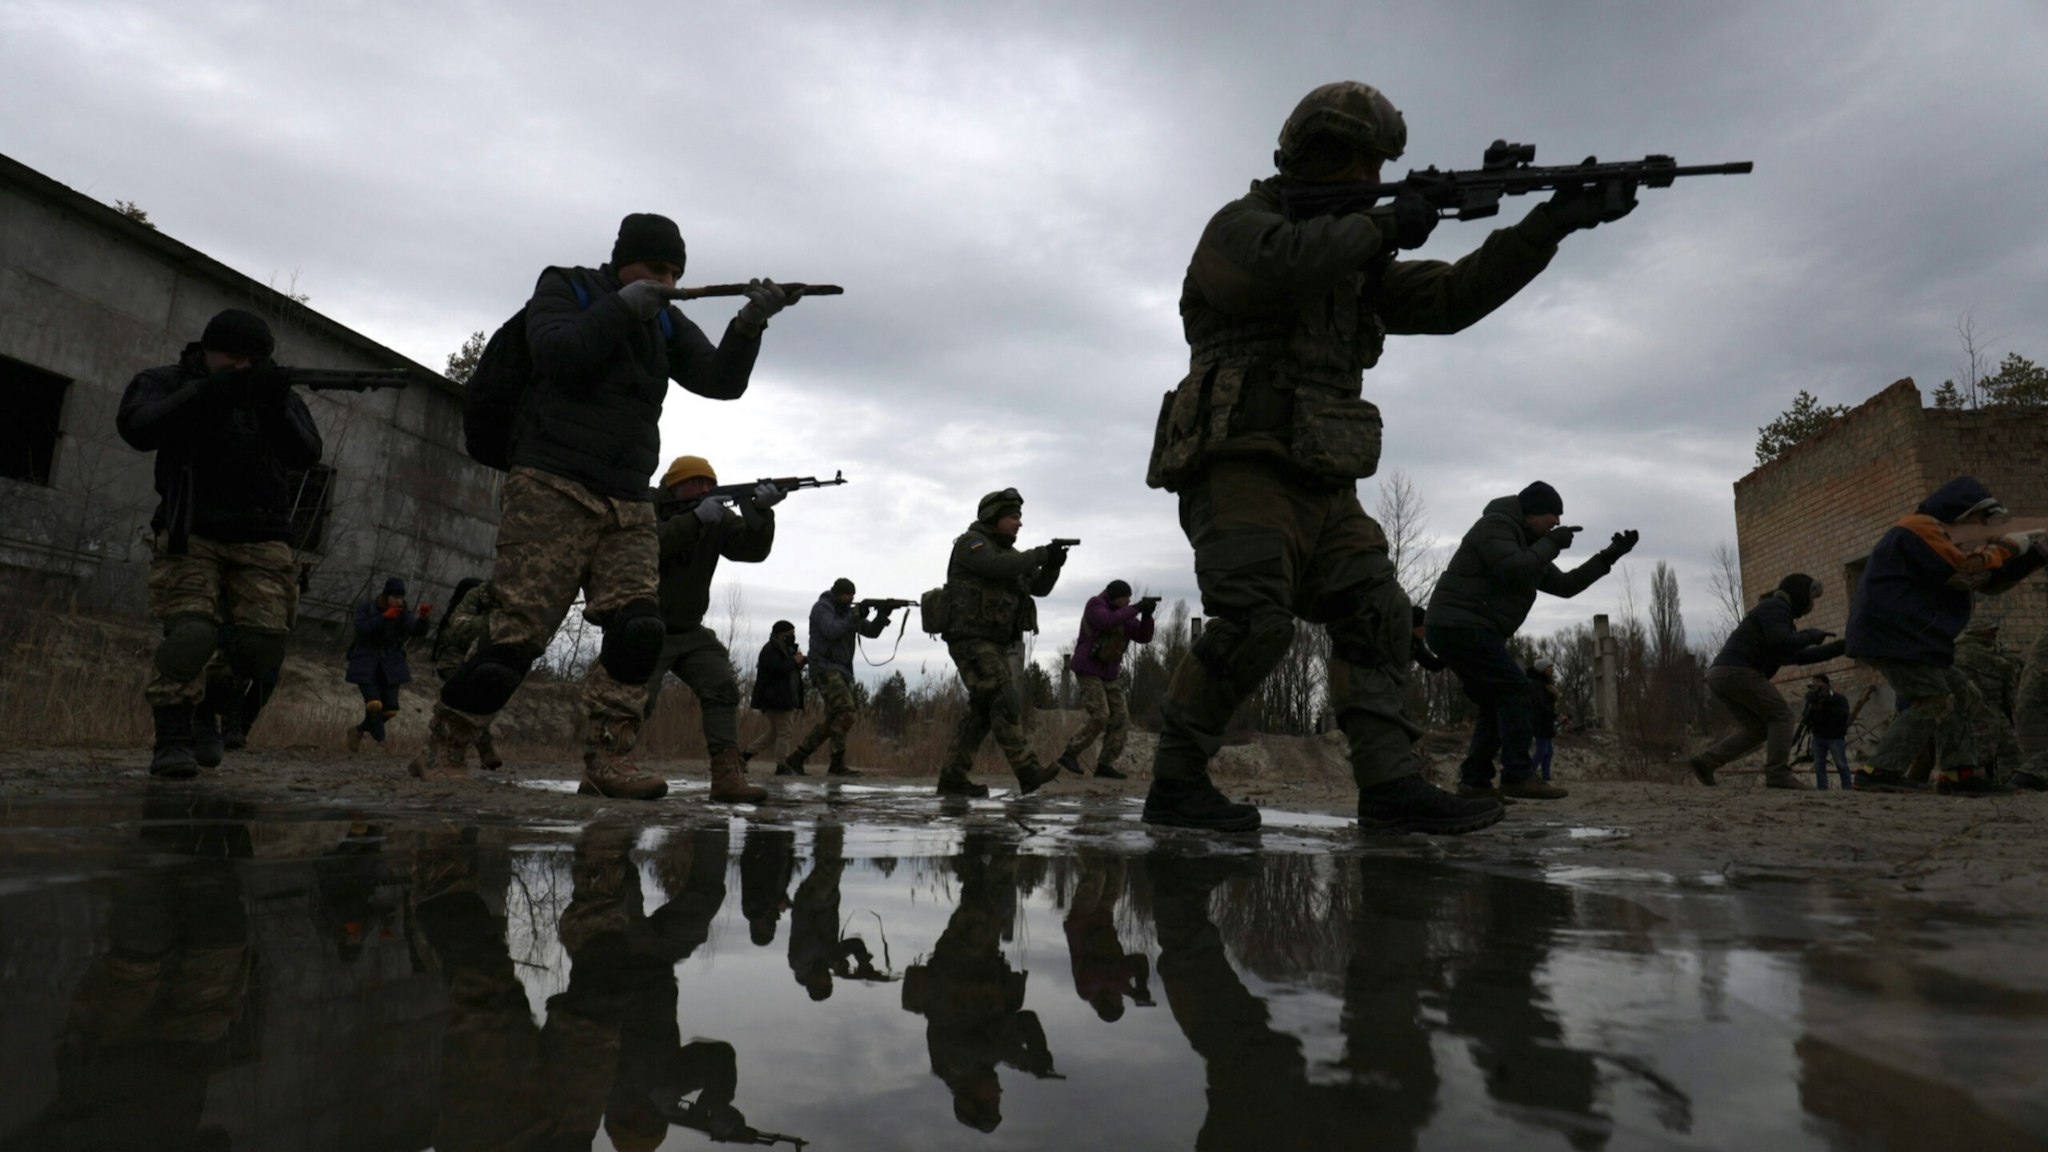 Members of Ukraine's Territorial Defense Forces participate in a drill during training at a former asphalt factory on the outskirts of Kyiv, Ukraine, on Saturday, Feb. 19, 2022.